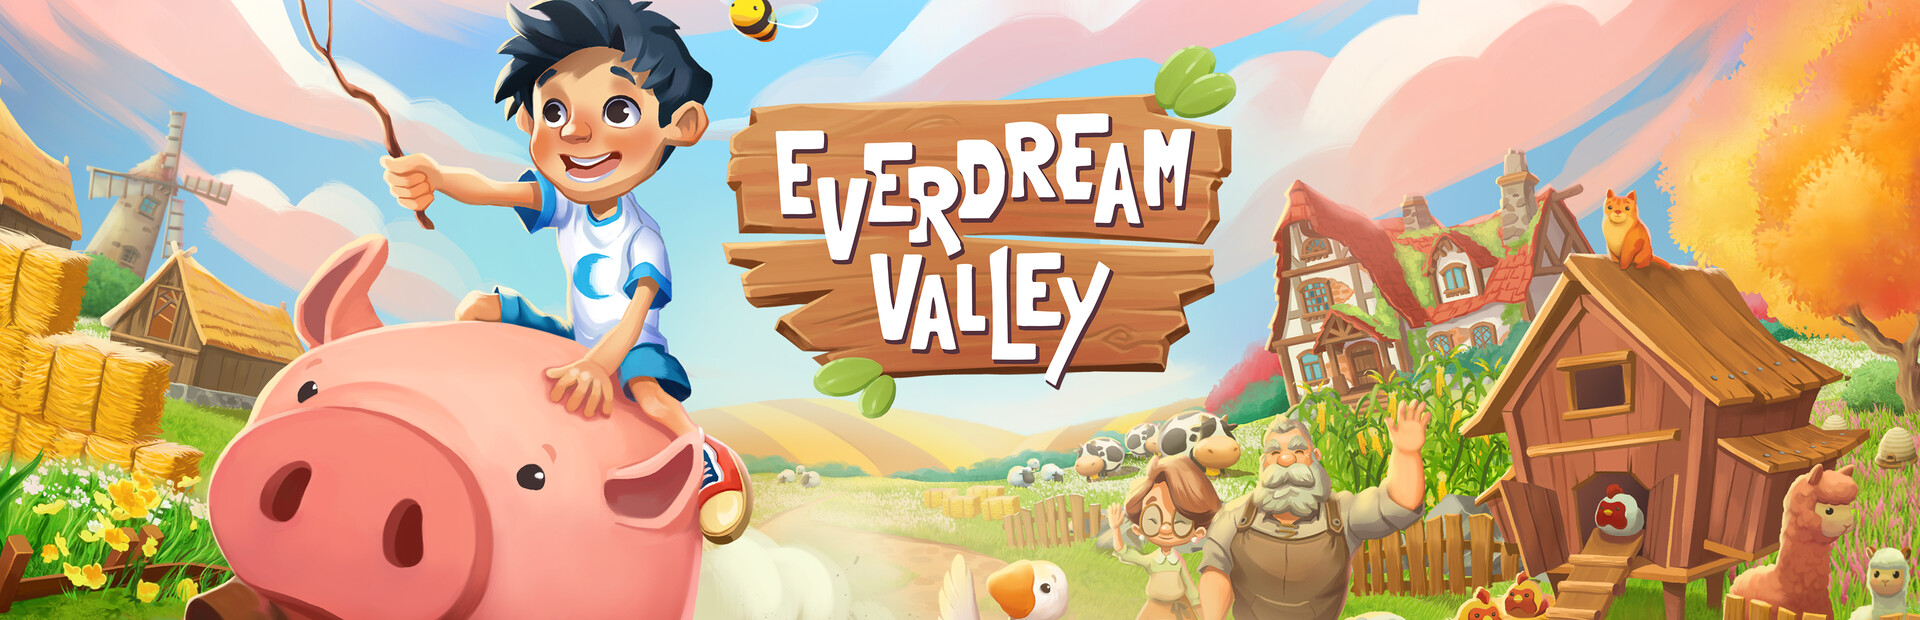 Everdream Valley cover image